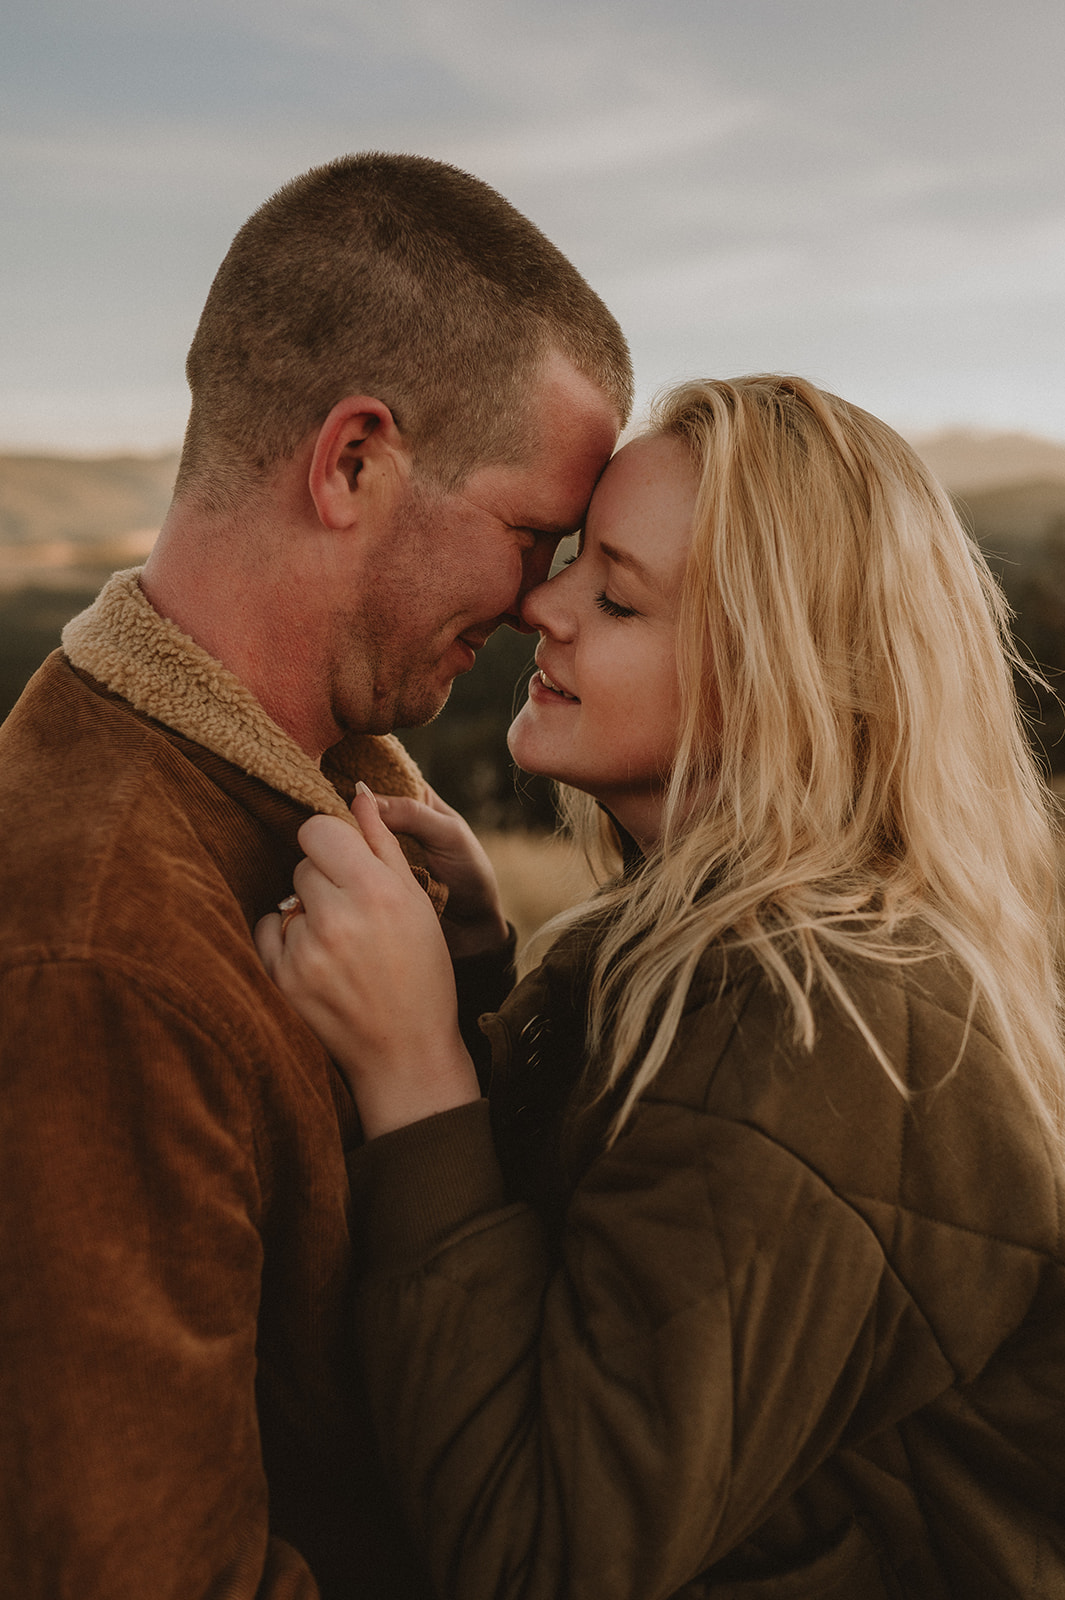 An engaged couple stands close, face to face, for an intimate portrait by Wyoming photographer Kaylie Sirek